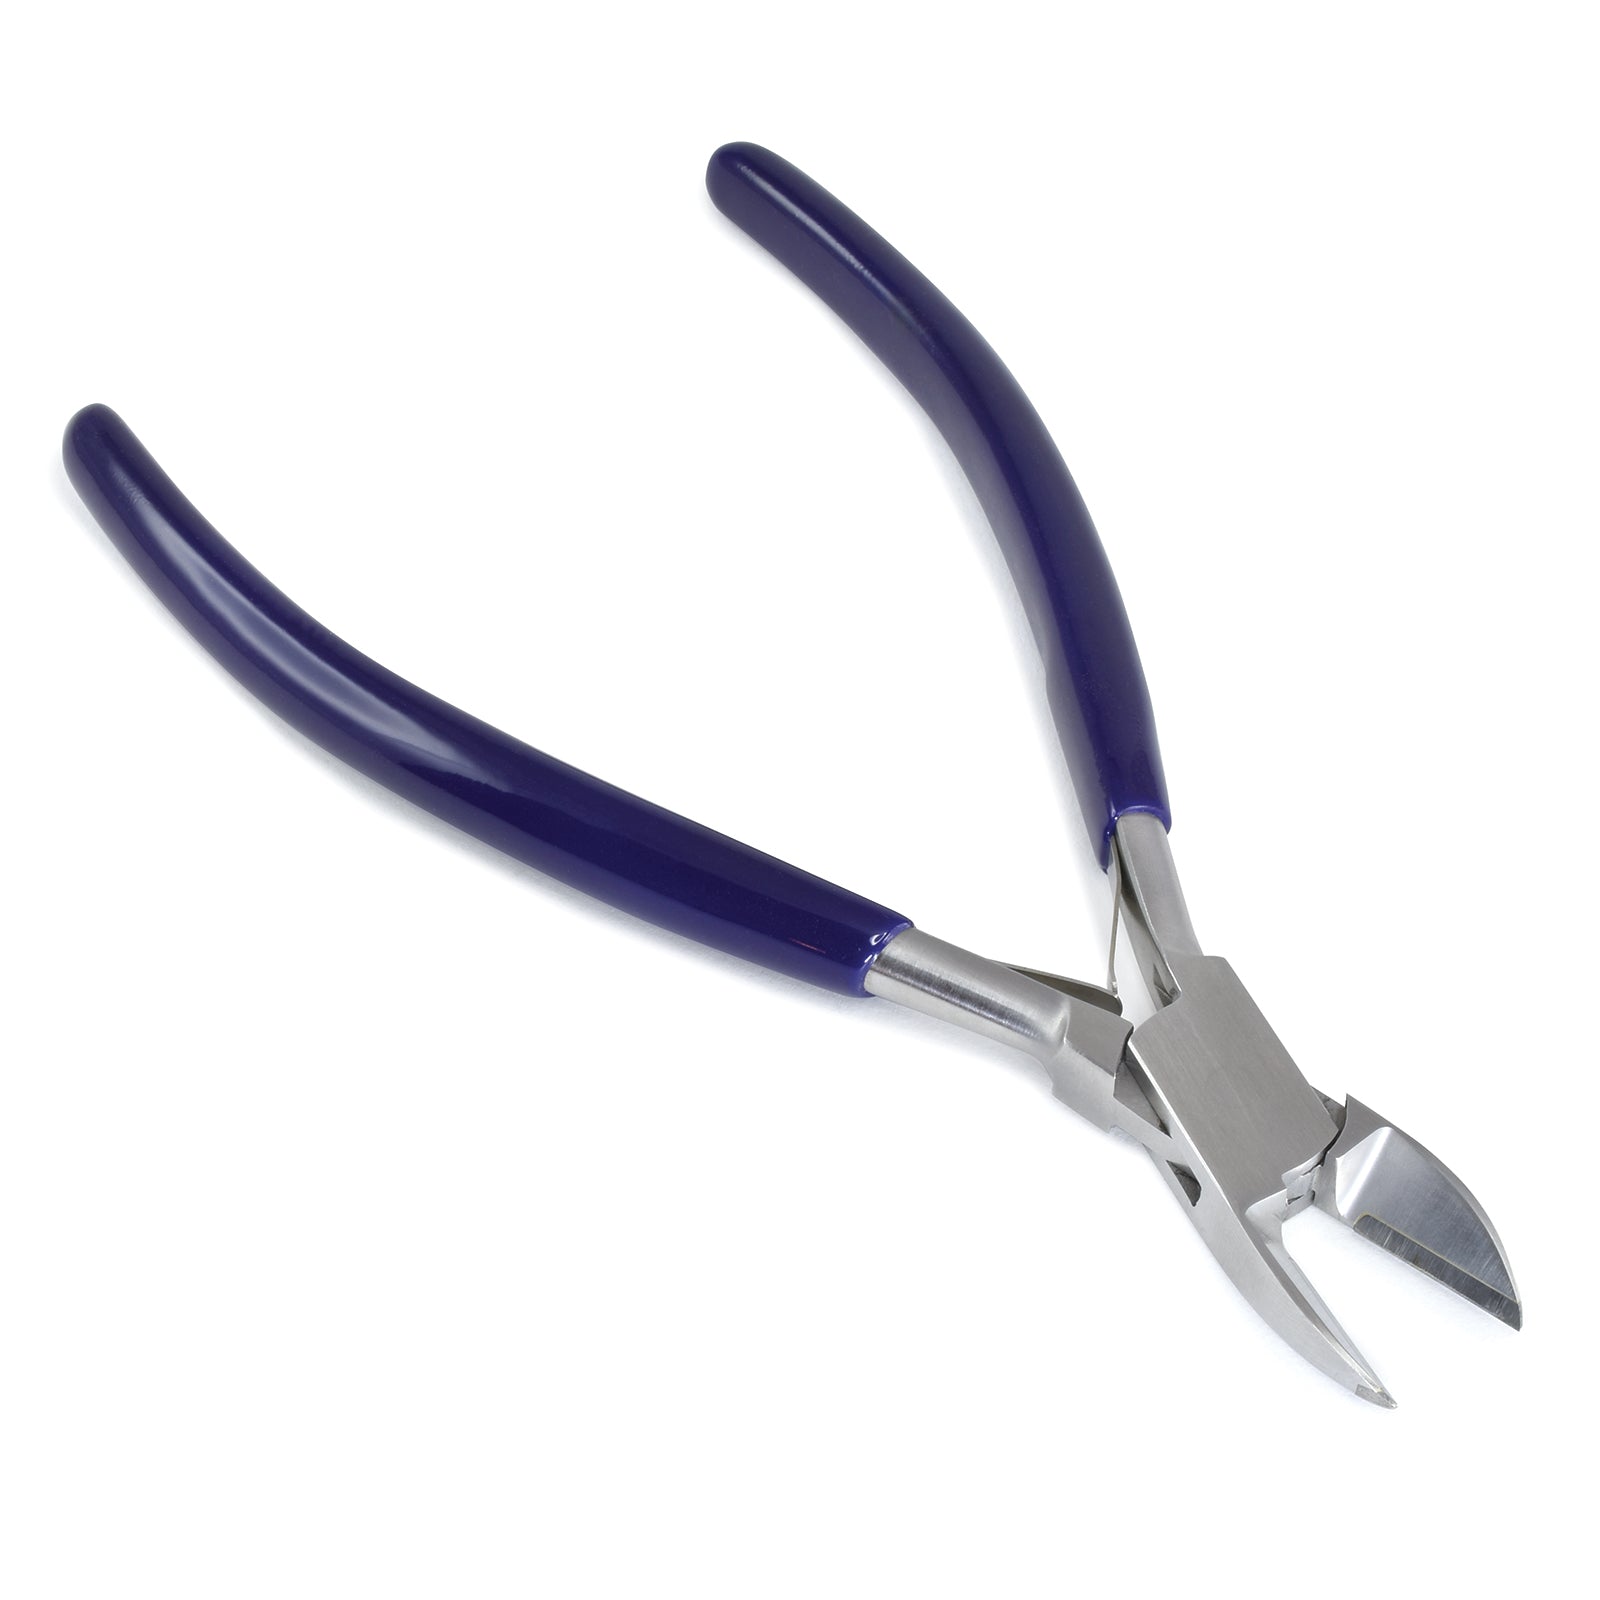 Hard Wire - Cutting Plier with Carbide Jaw Inserts